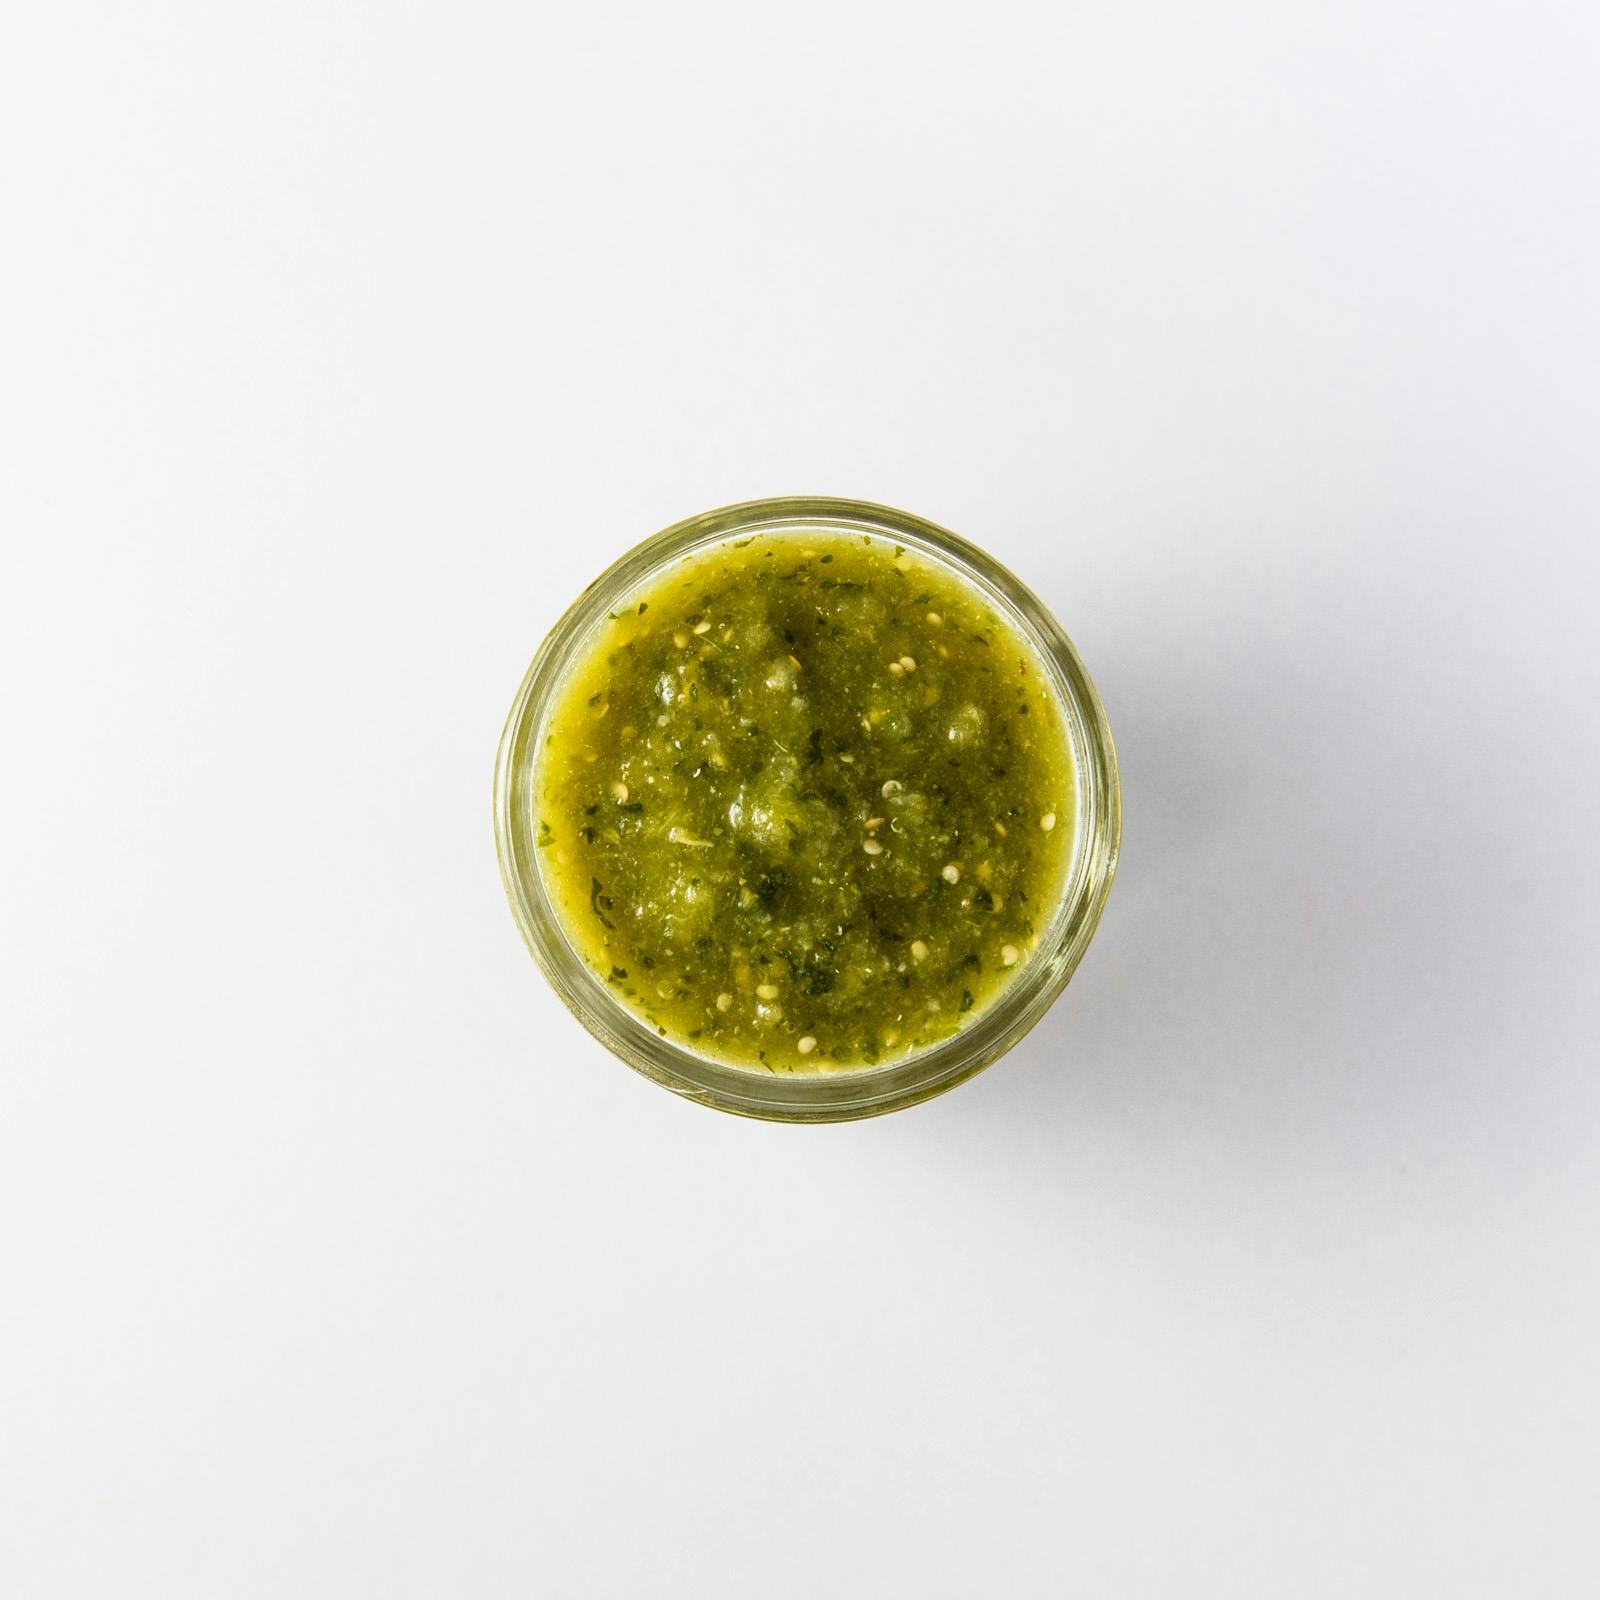 Tomatillo Salsa from Taco Royale - Fitchburg in Fitchburg, WI